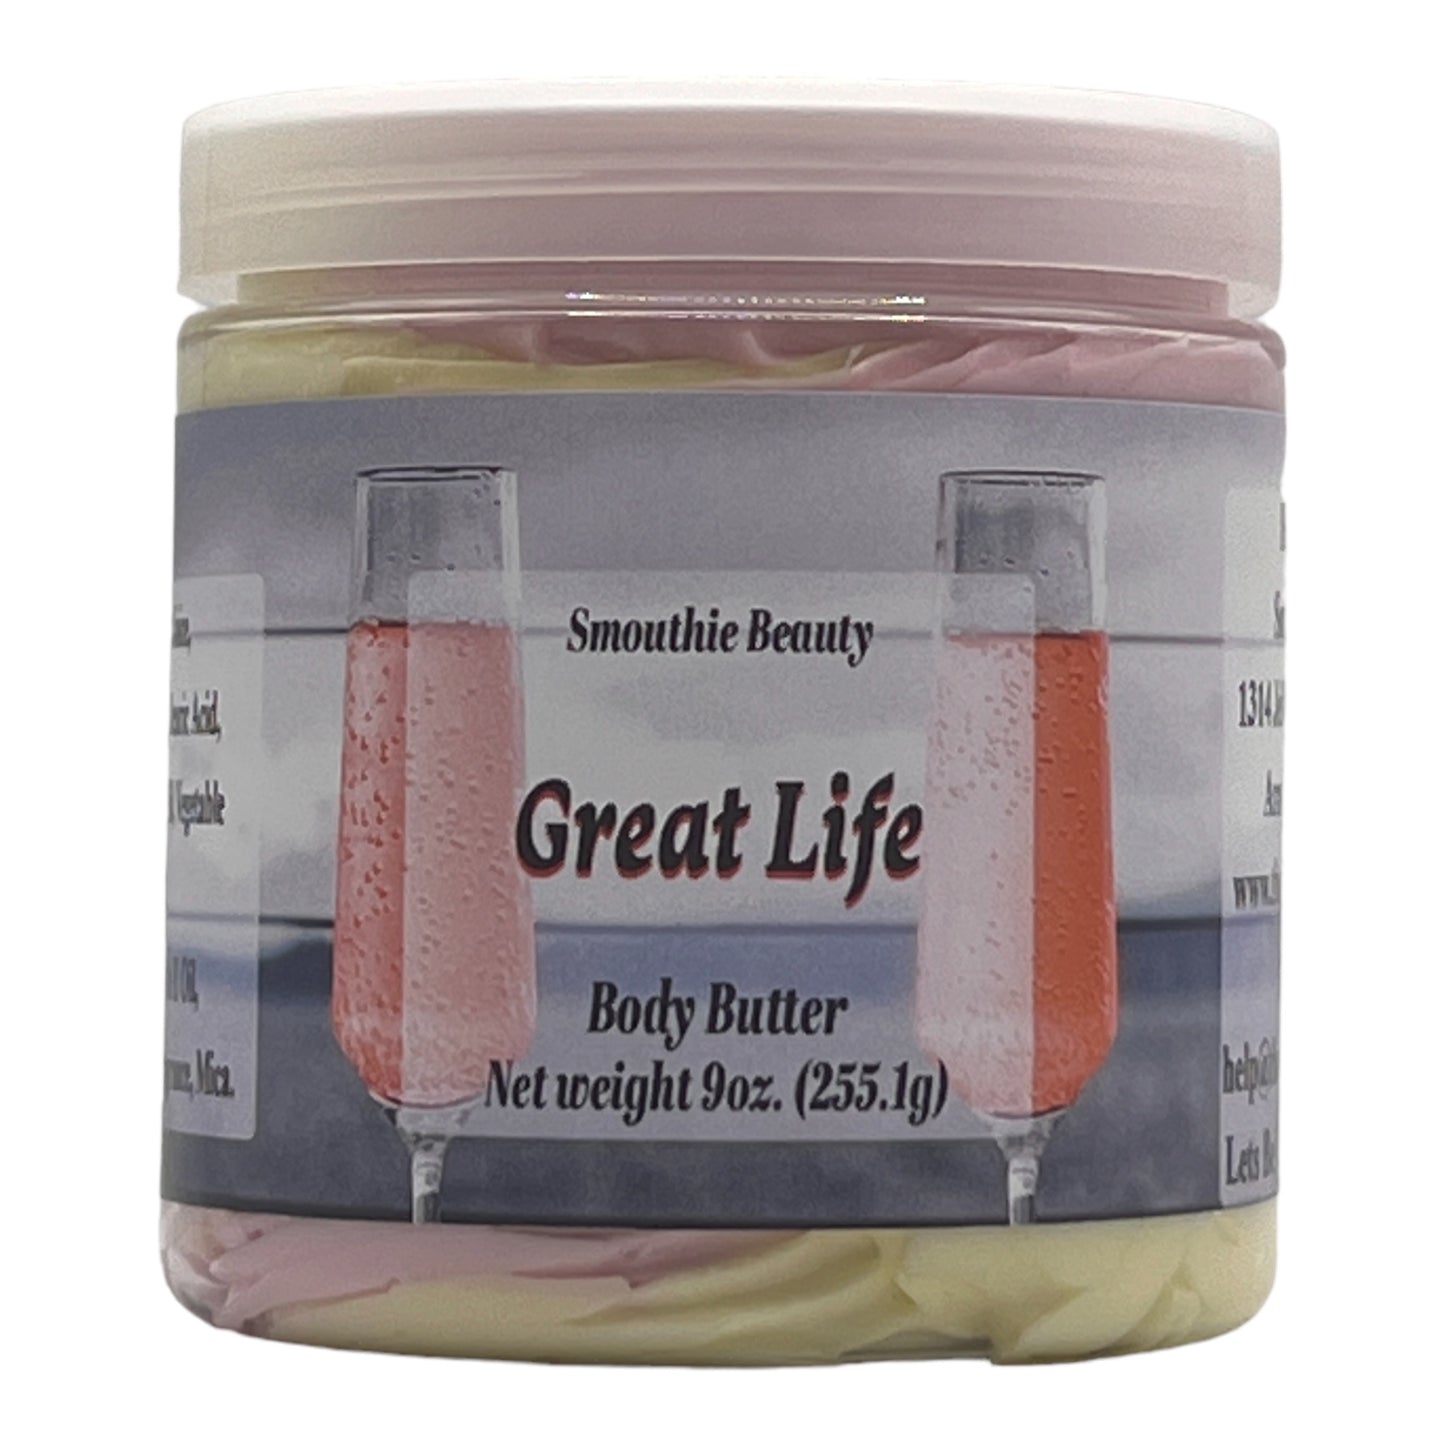 Great Life Body Butter